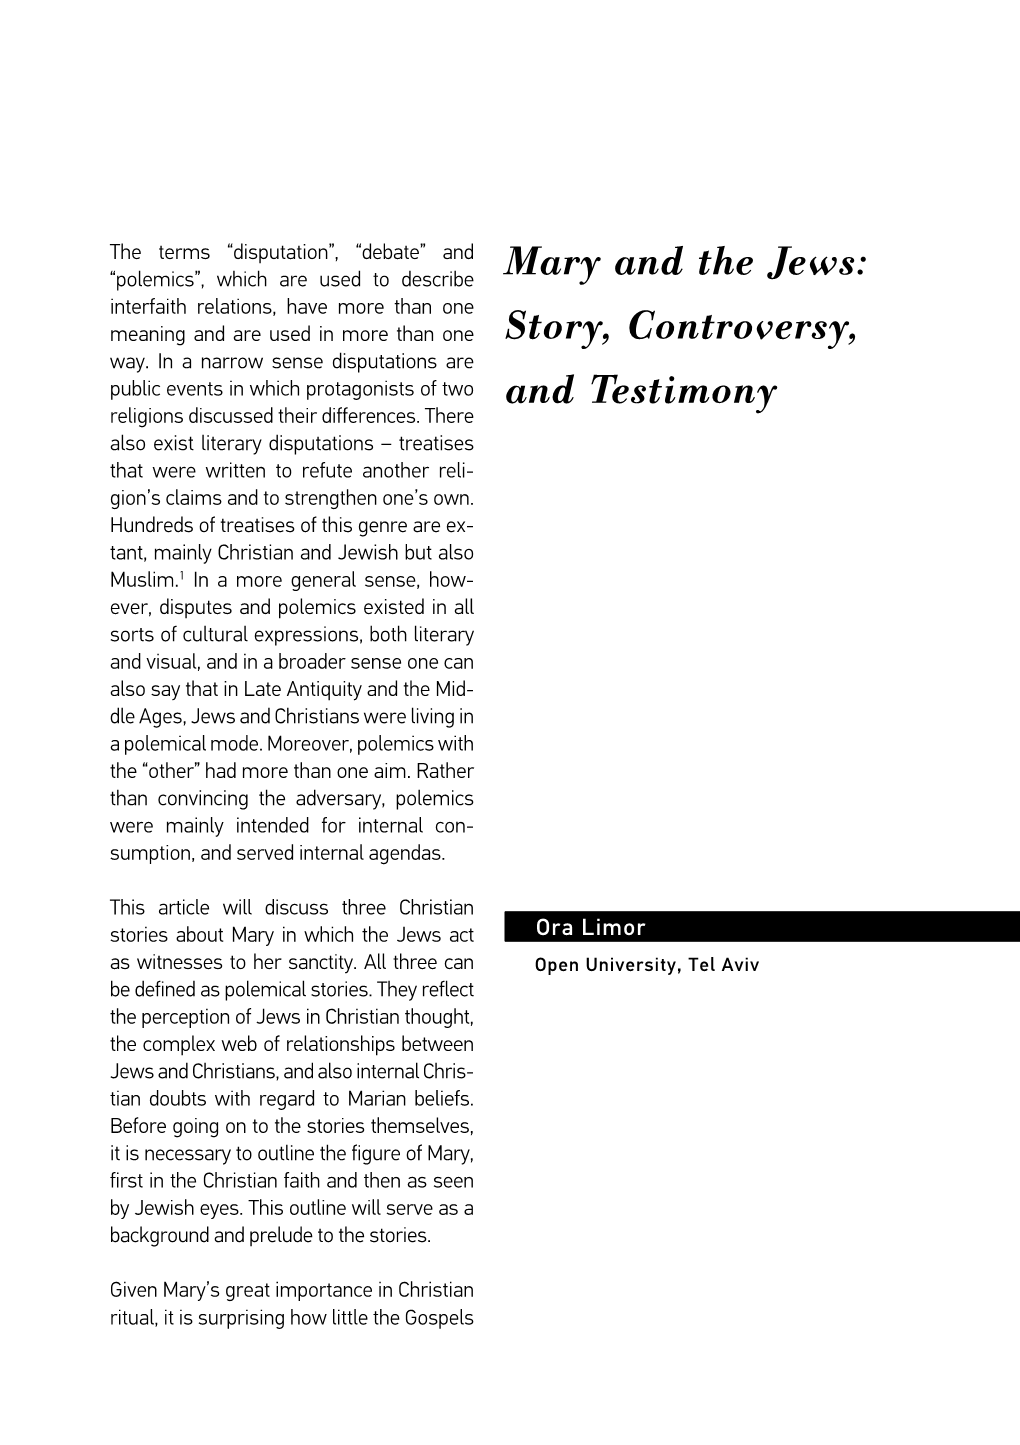 Mary and the Jews: Story, Controversy, and Testimony HISTOREIN